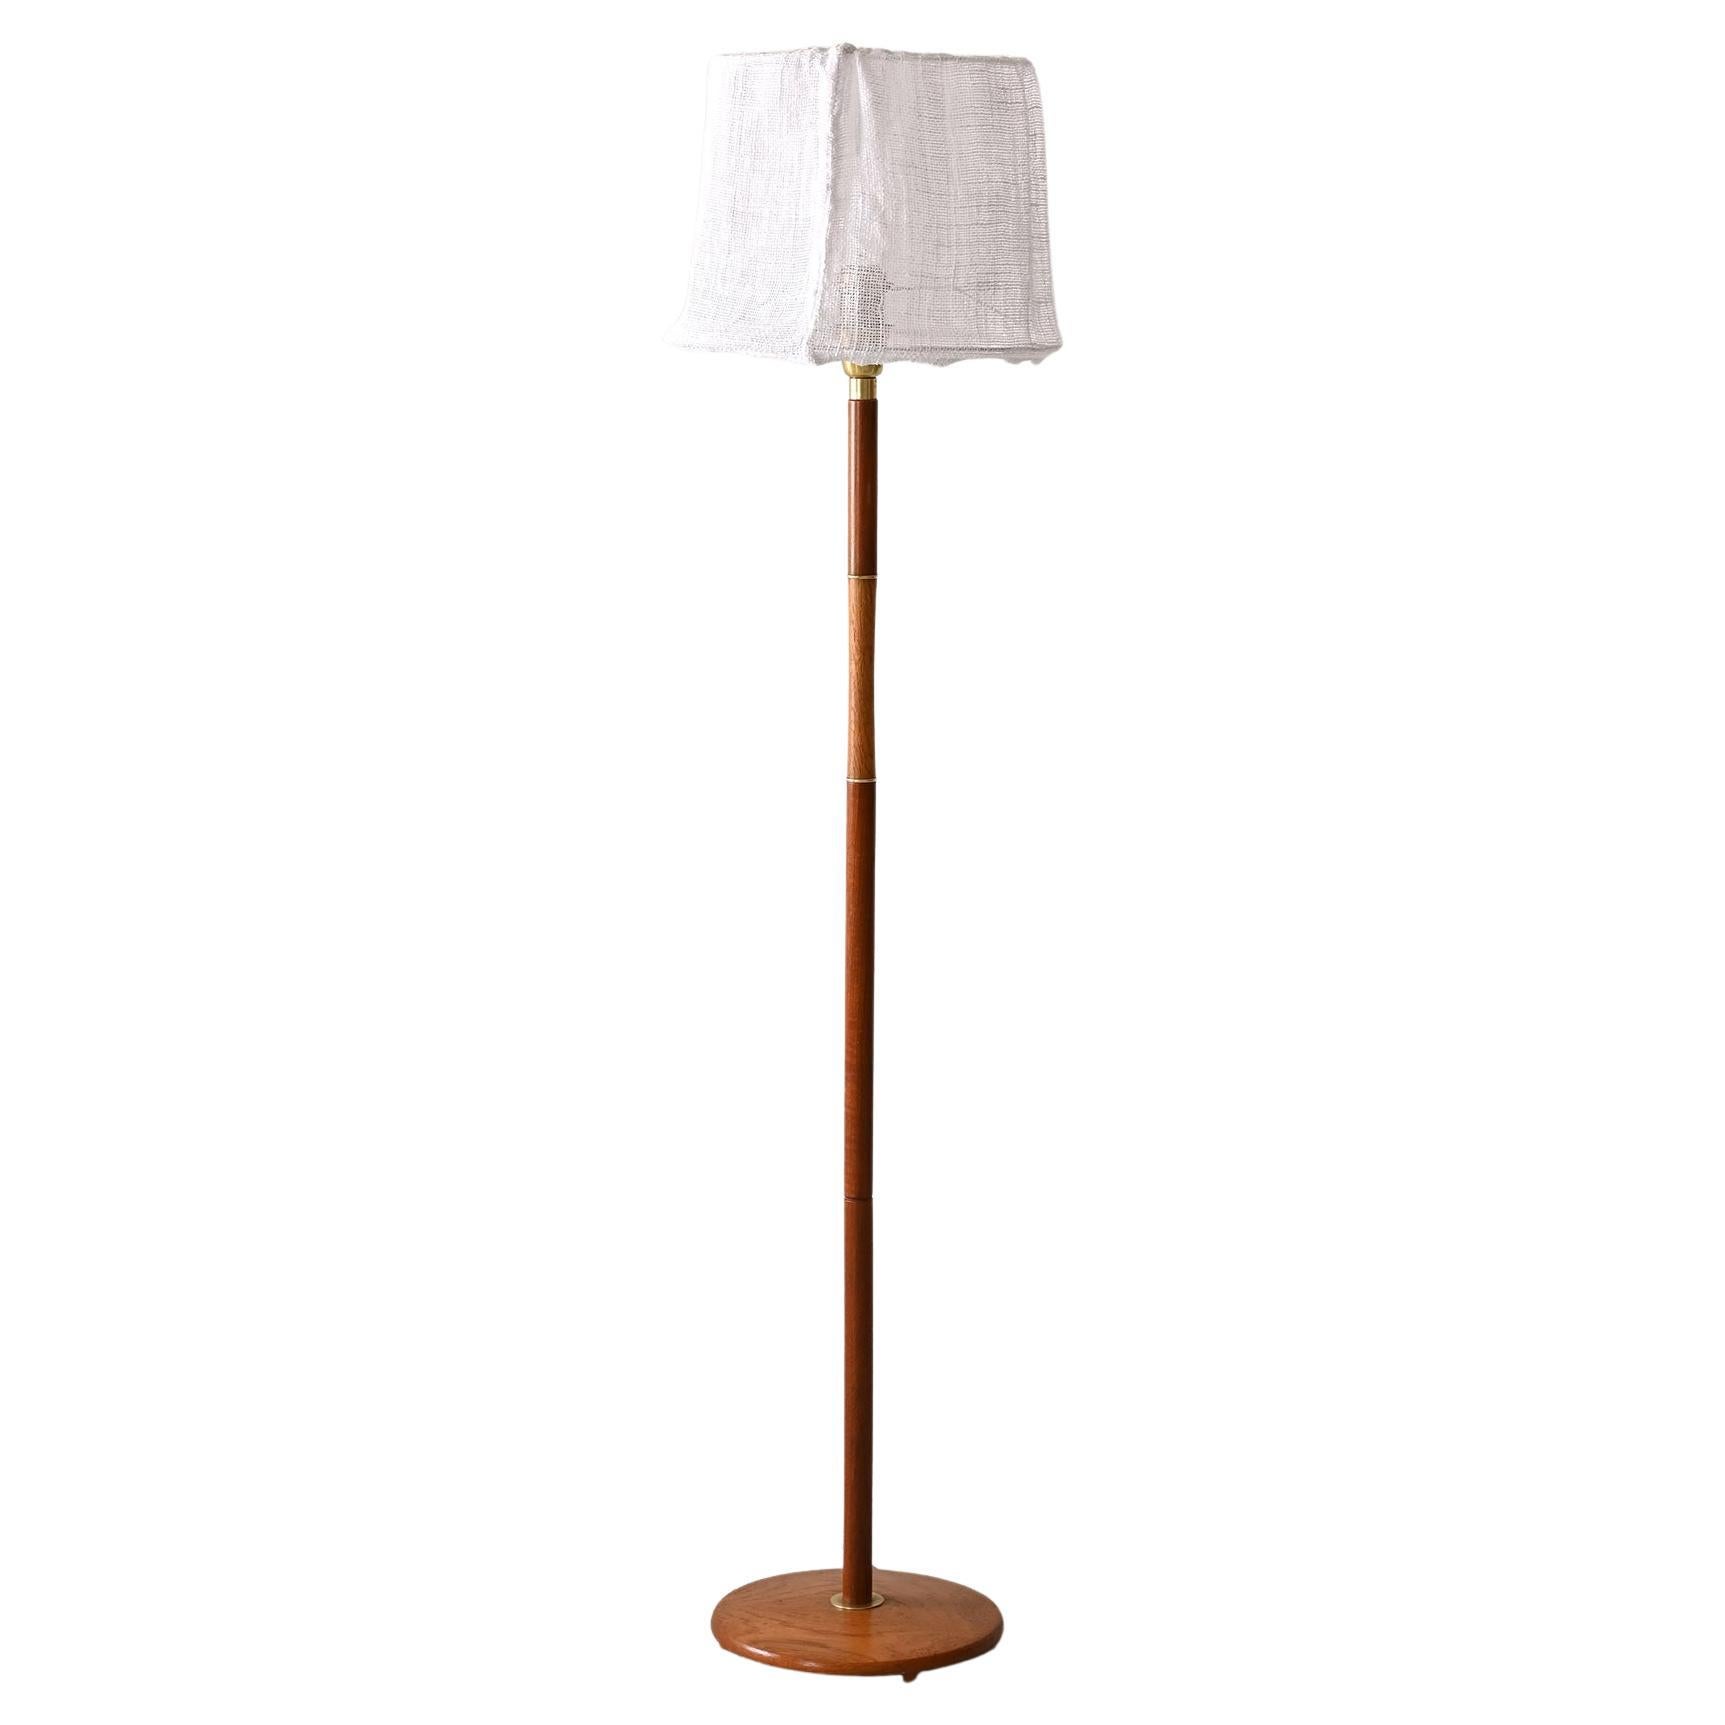 Vintage floor lamp with fabric shade